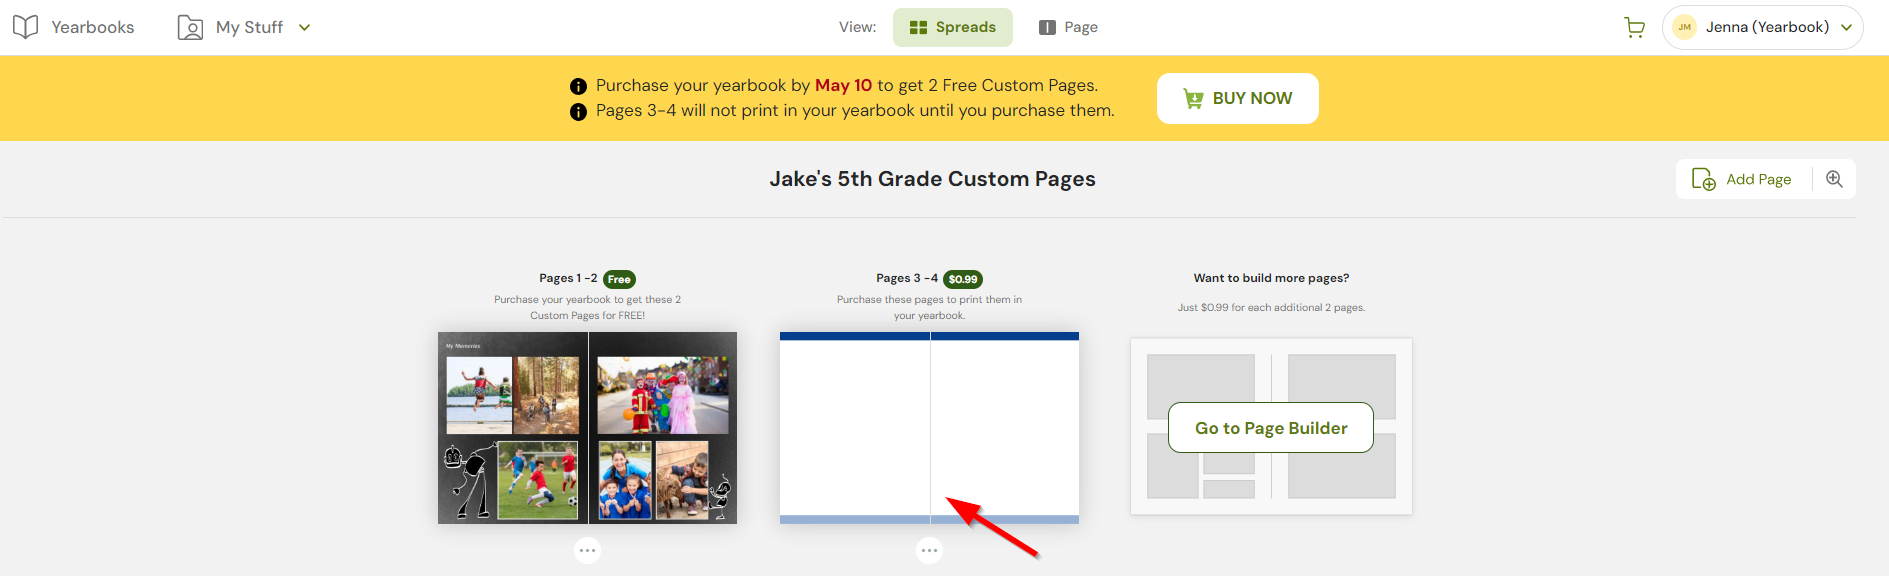 Custom Pages - Graphics - Page Spread Selection in All Pages.png